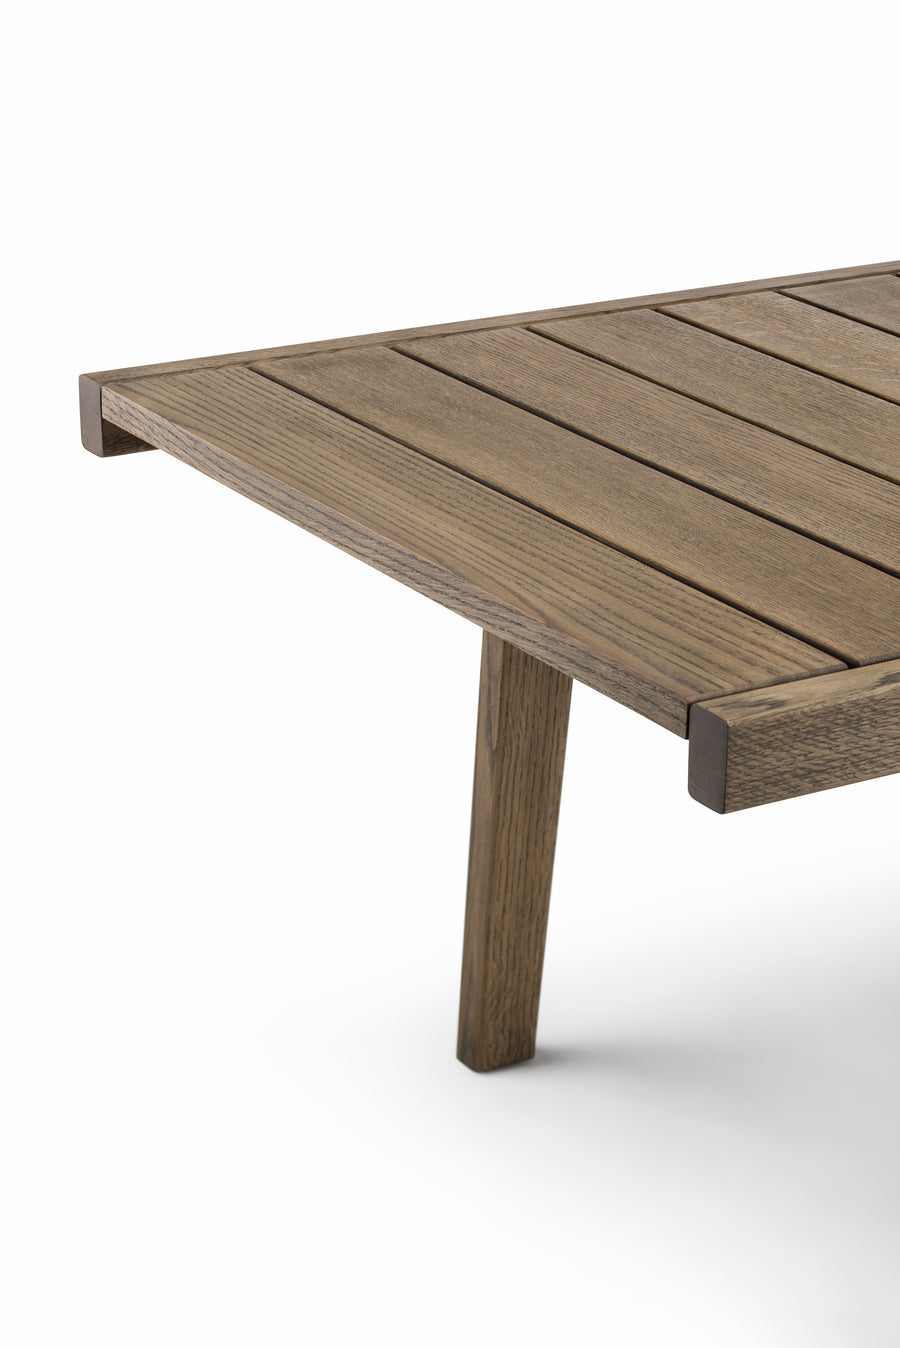 98.6°F OUTDOOR DINING TABLE